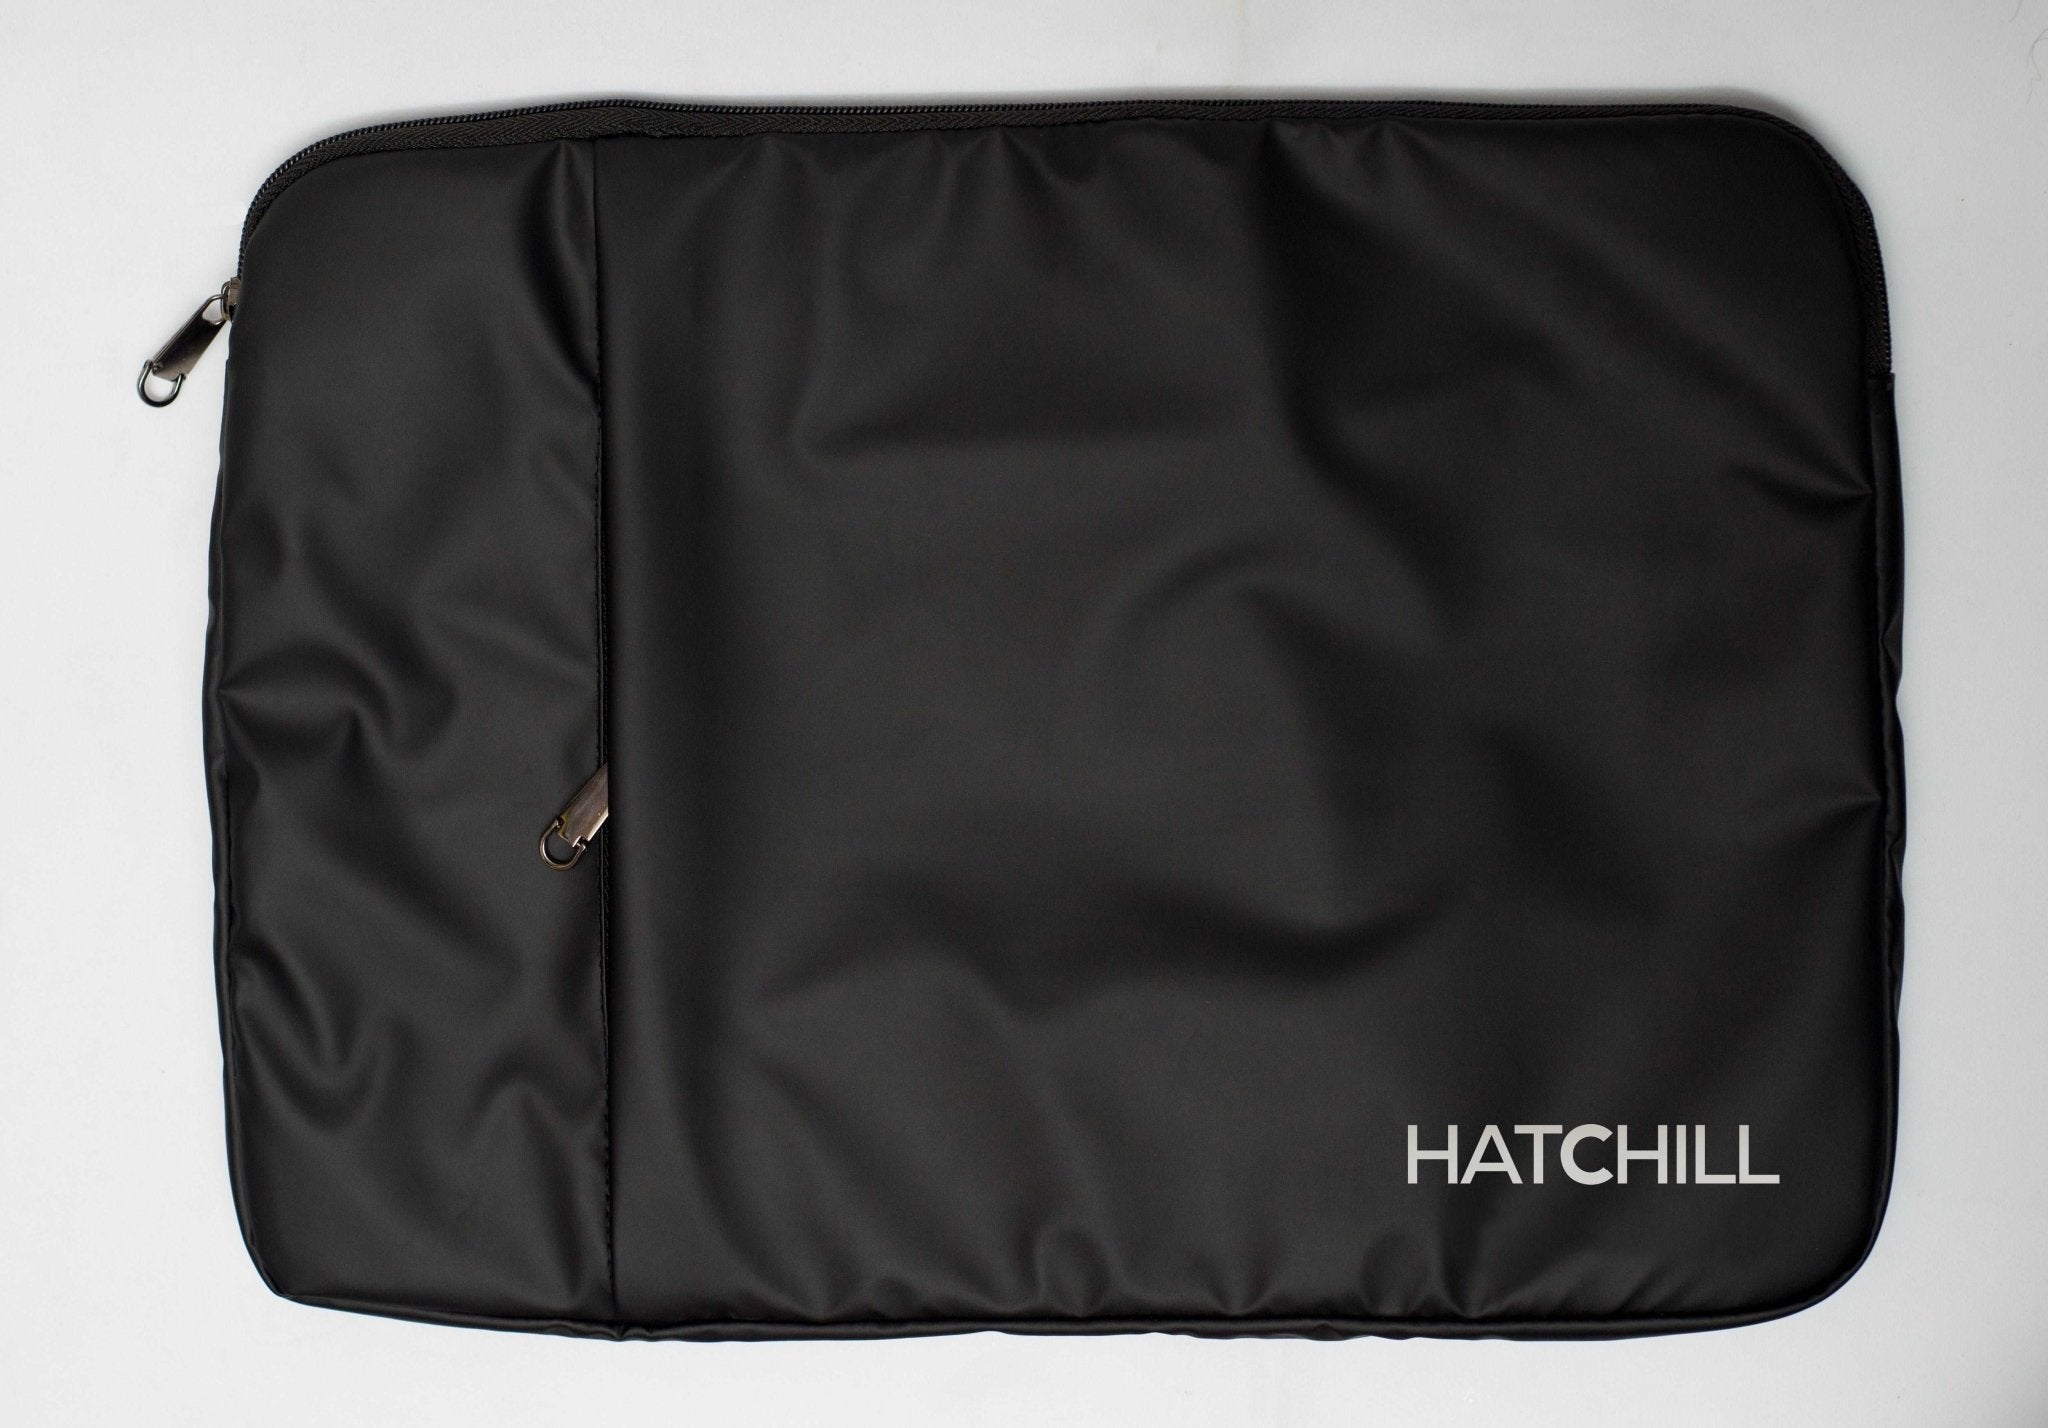 The Black Business Laptop Sleeve - Hatchill